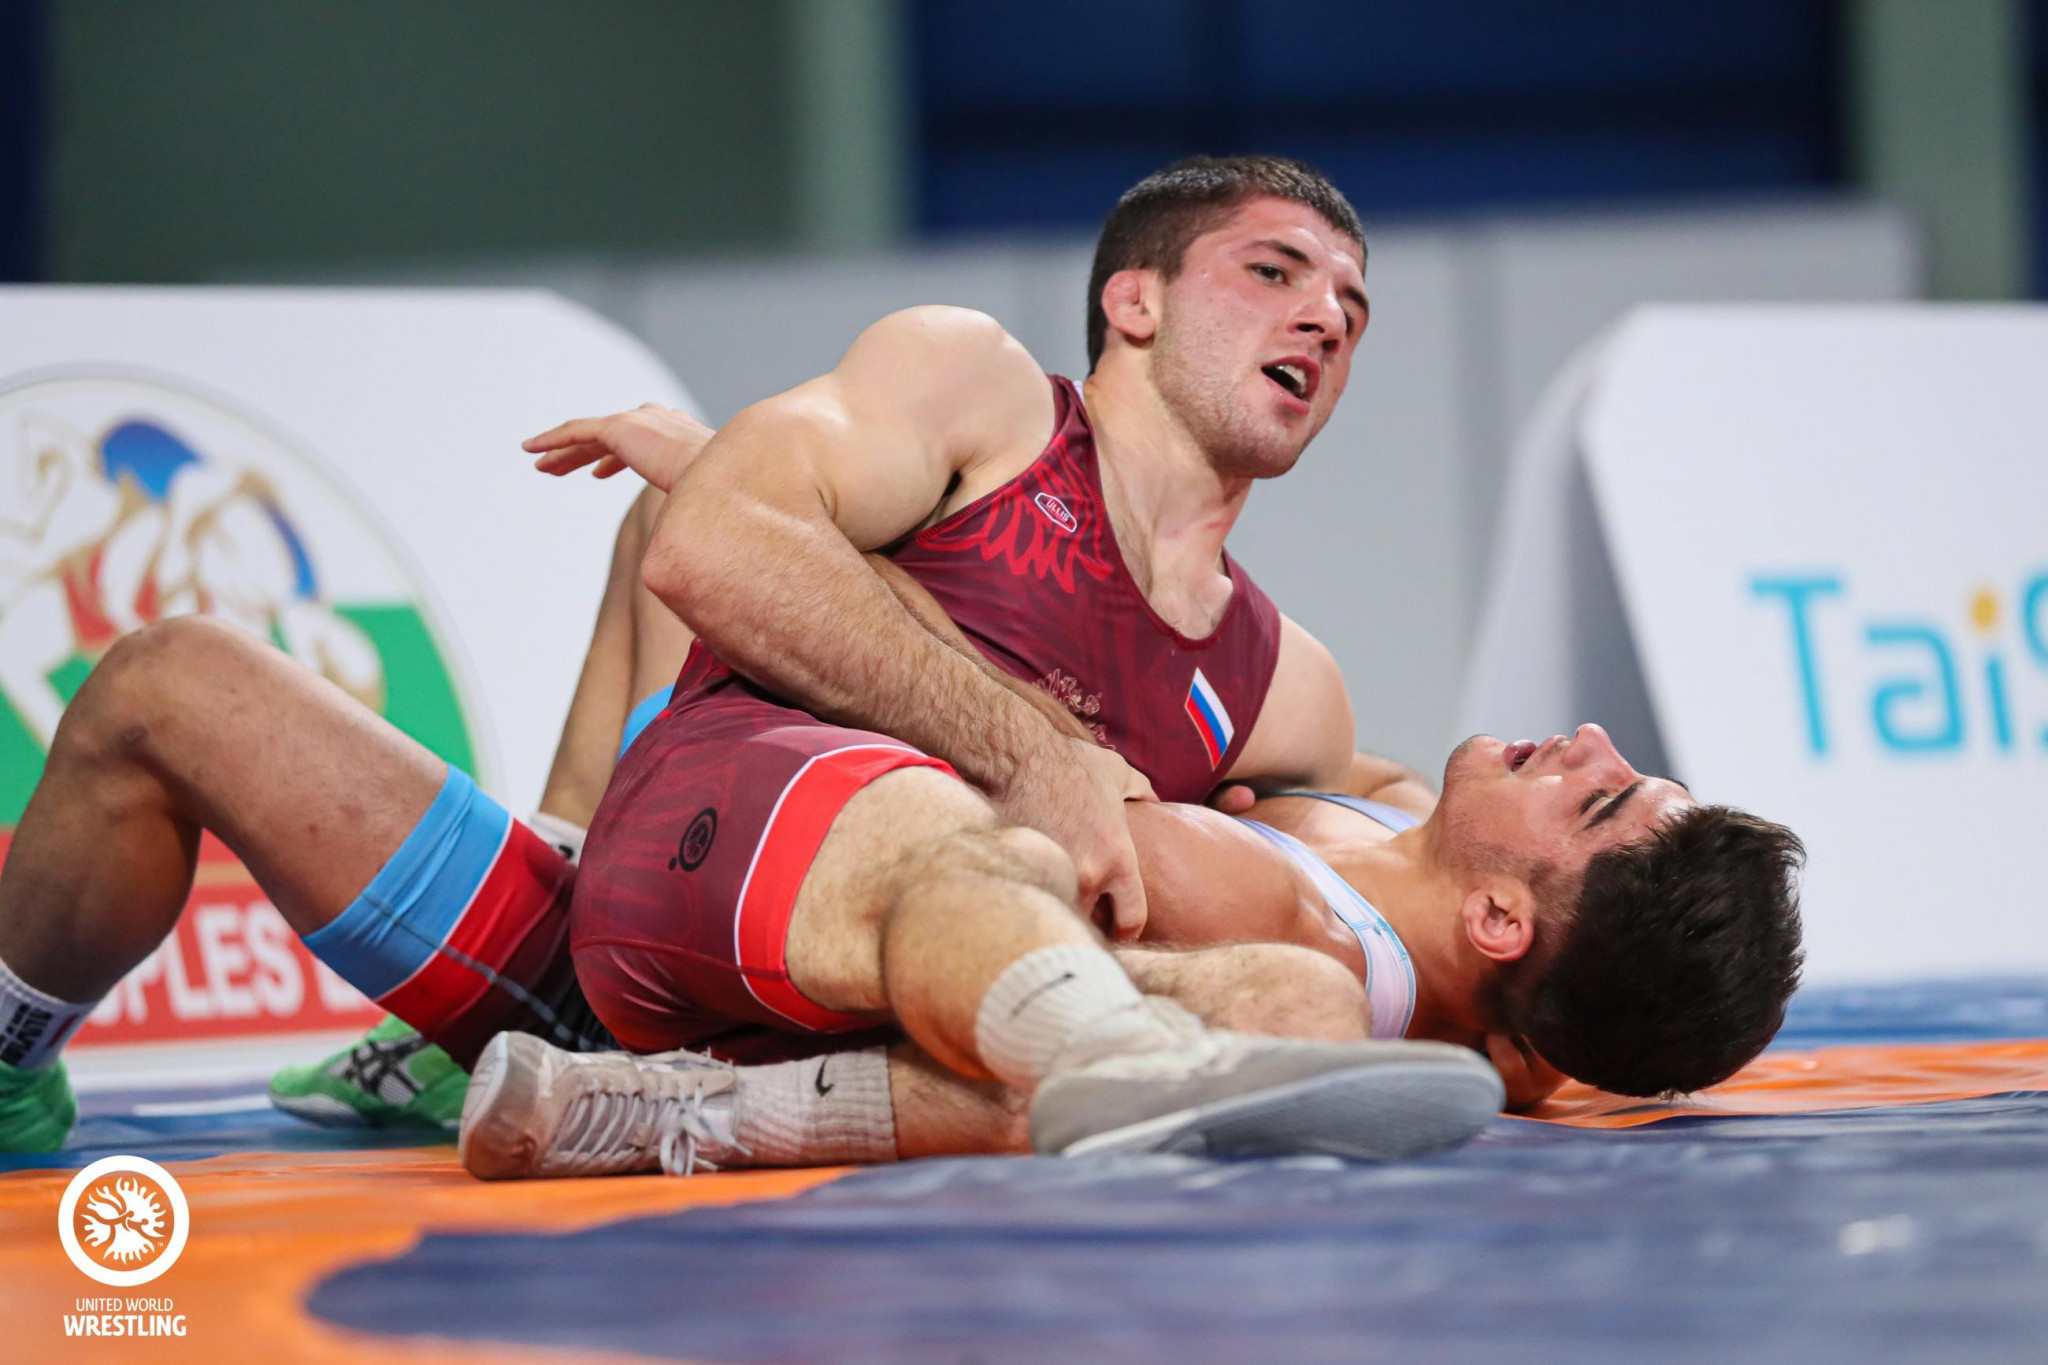 Three final golds for Russia in men’s freestyle at Cadet World